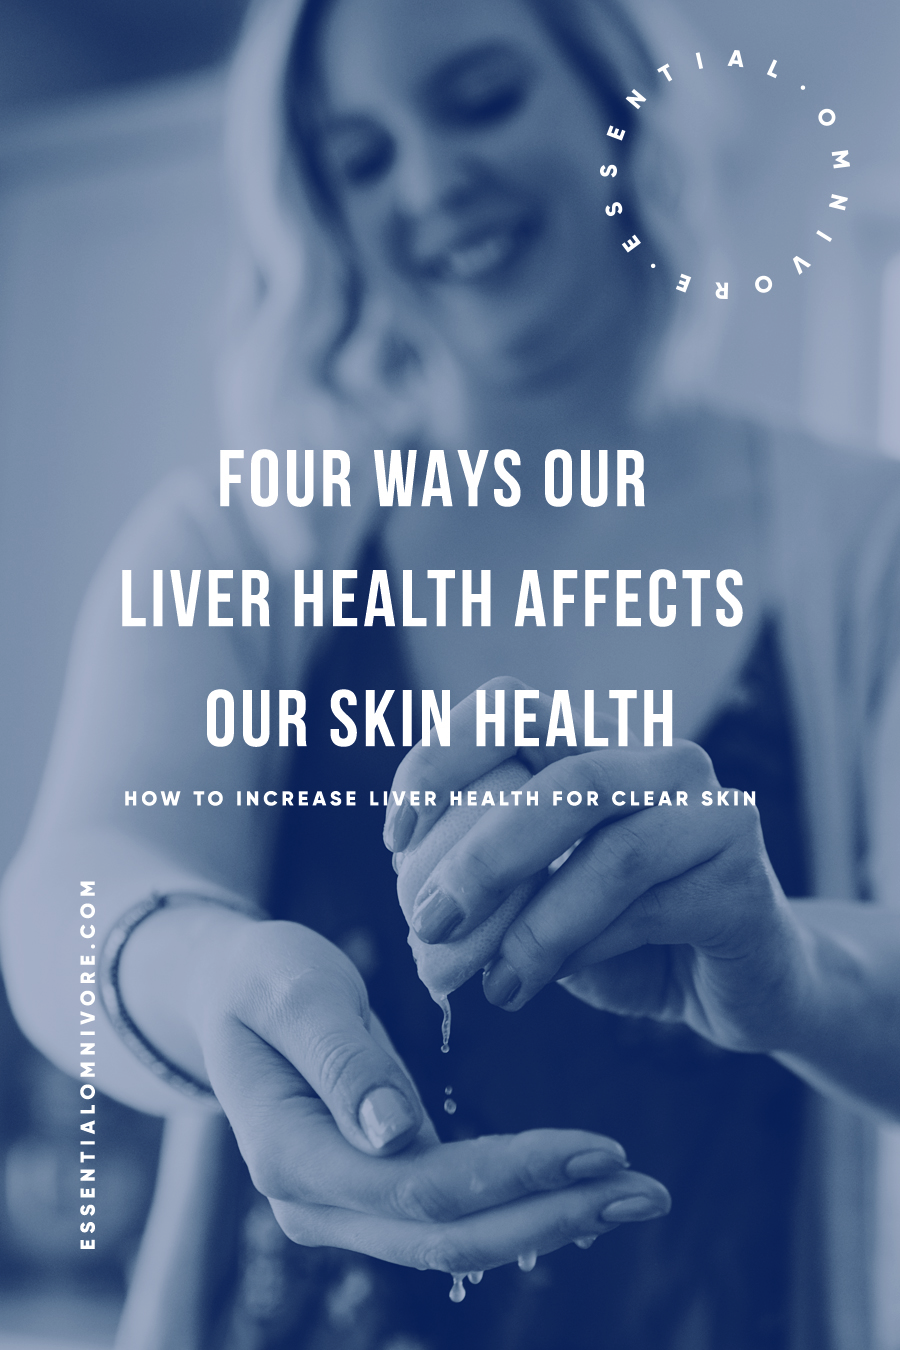 Four Ways Our Liver Health Affects Our Skin Health